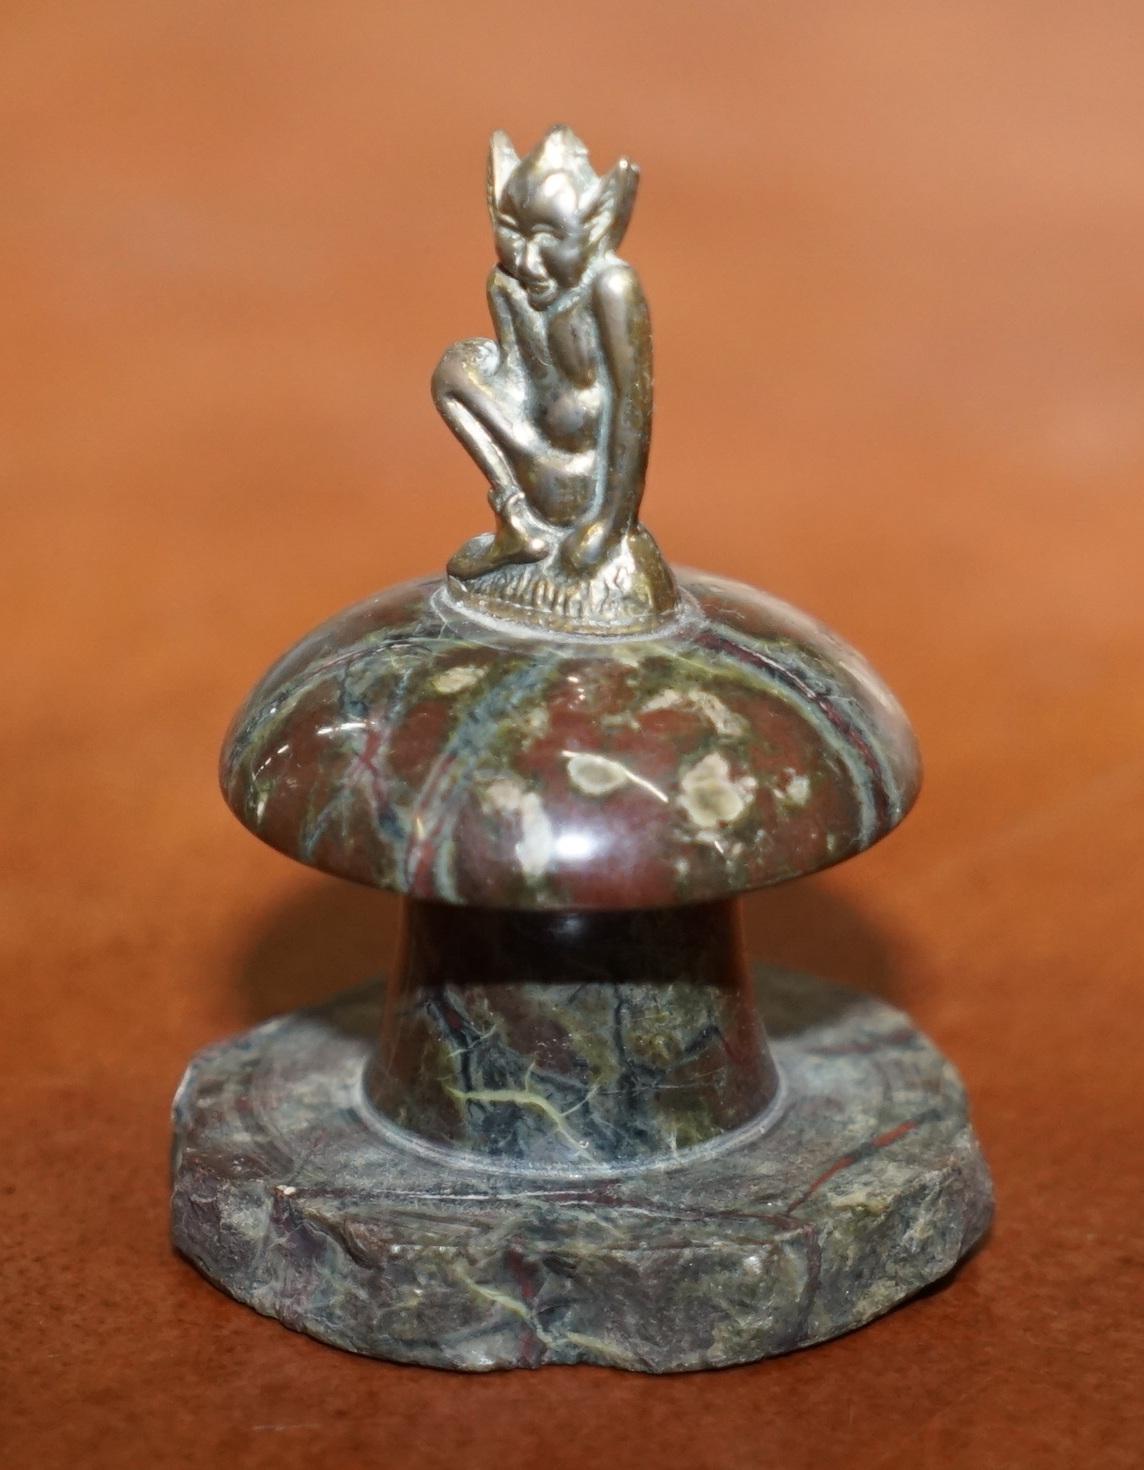 We are delighted to offer for sale this lovely small statue of a bronze Pixy sitting on top of a polished rock

A good luck charm to bring wealth happiness and health or at least that's what I like to believe 

Dimensions

Height